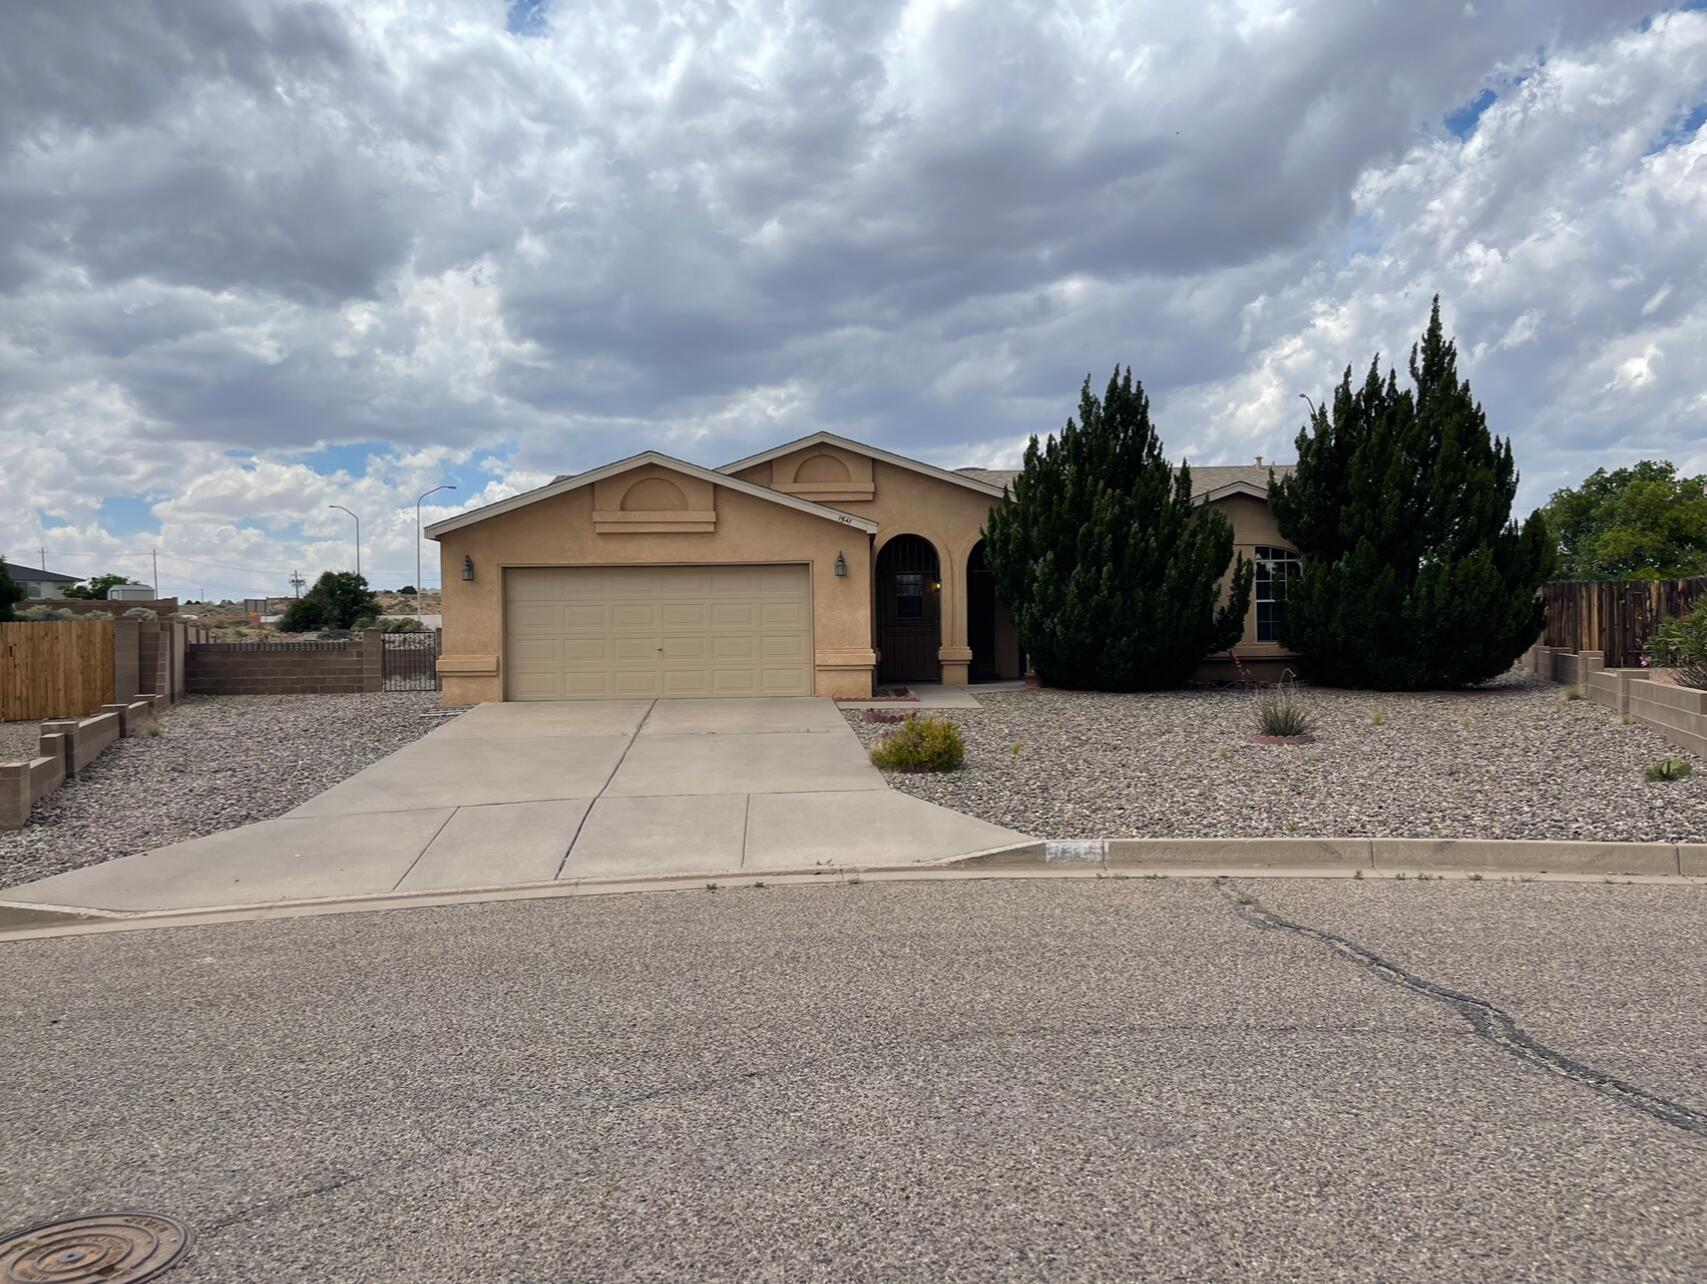 This fantastic 3 bedroom residence is conveniently located in Rio Rancho. Roof replaced in 2018, No poly pipes, Furnace & A/C replaced in 2016, water heater replaced in 2019.  It has gorgeous mountain views from the front door.  Step inside & be greeted by a spacious & inviting living area, adorned with large windows that fill the home with natural light. The open floor plan seamlessly connects the living room, dining area & kitchen, creating an ideal space for entertaining friends or family. The kitchen offers plenty of cabinetry, a pantry and a breakfast nook area. The master suite offers a full bathroom, a walk-in closet, and a nice layout.